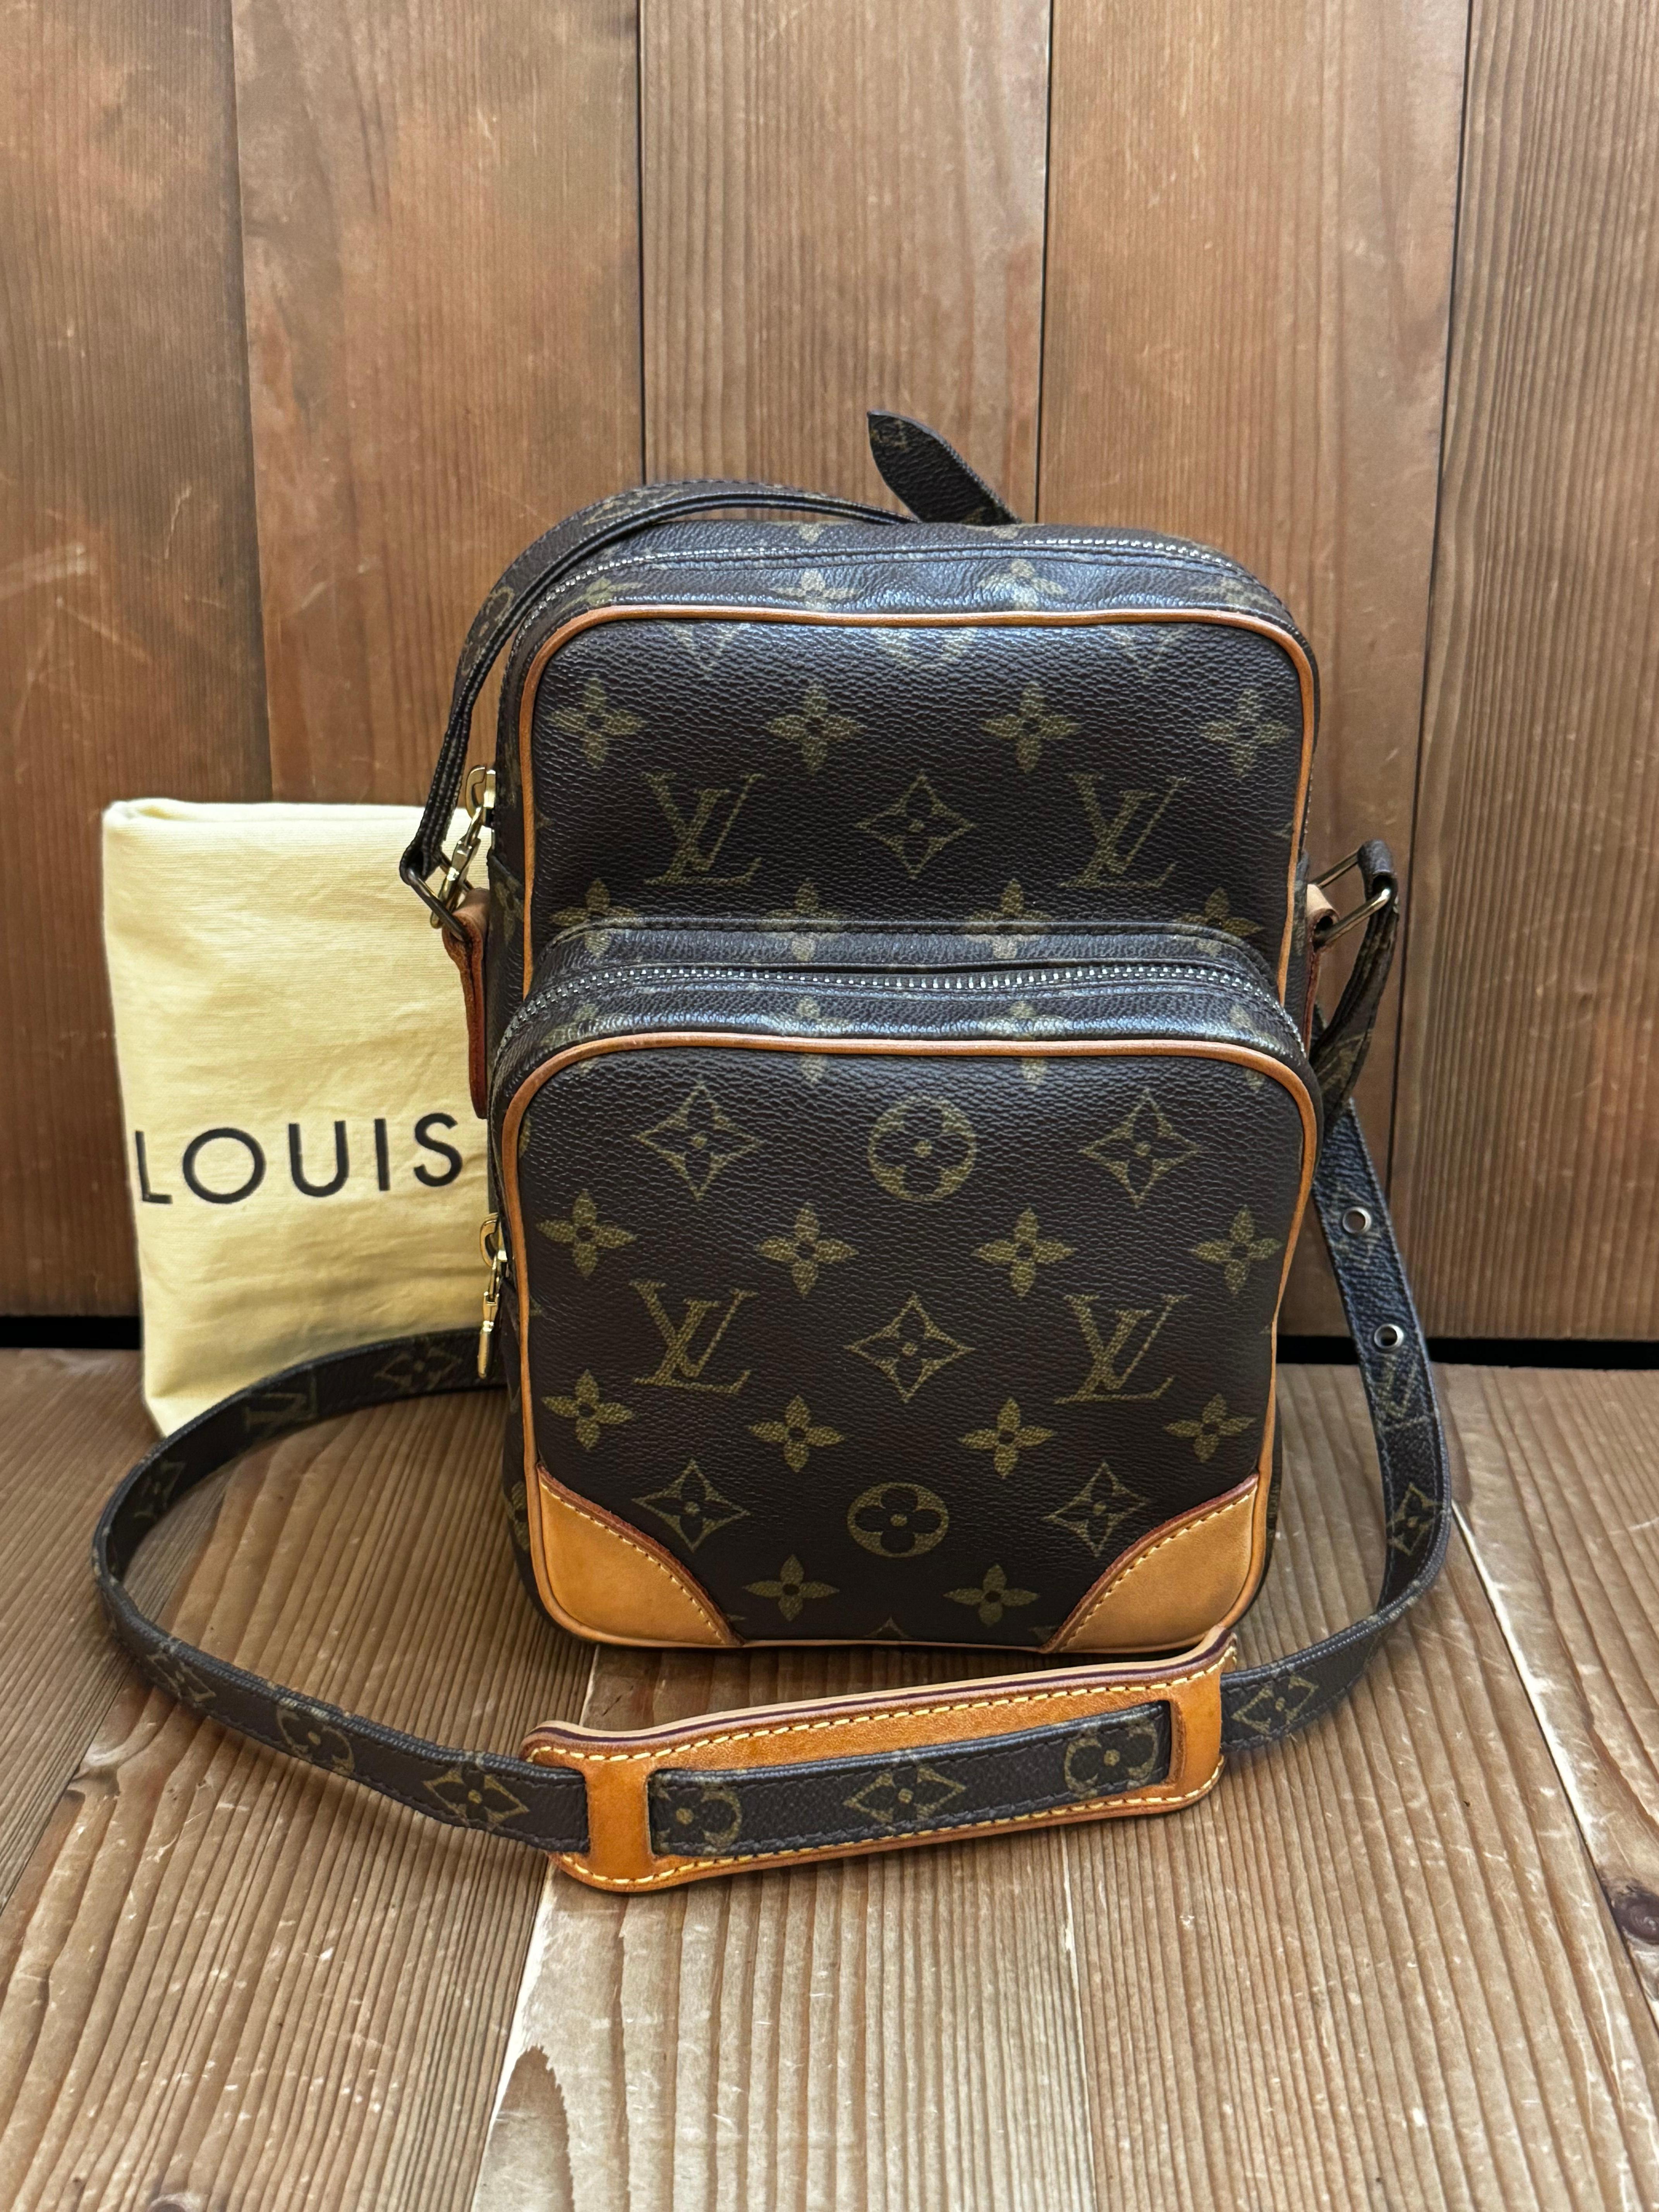 This LOUIS VUITTON Amazon camera crossbody bag is crafted of LV’s coated monogram canvas in brown and vachetta leather featuring brass hardware. This crossbody bag features one bigger and one smaller zippered compartments. Top zipper closure of the